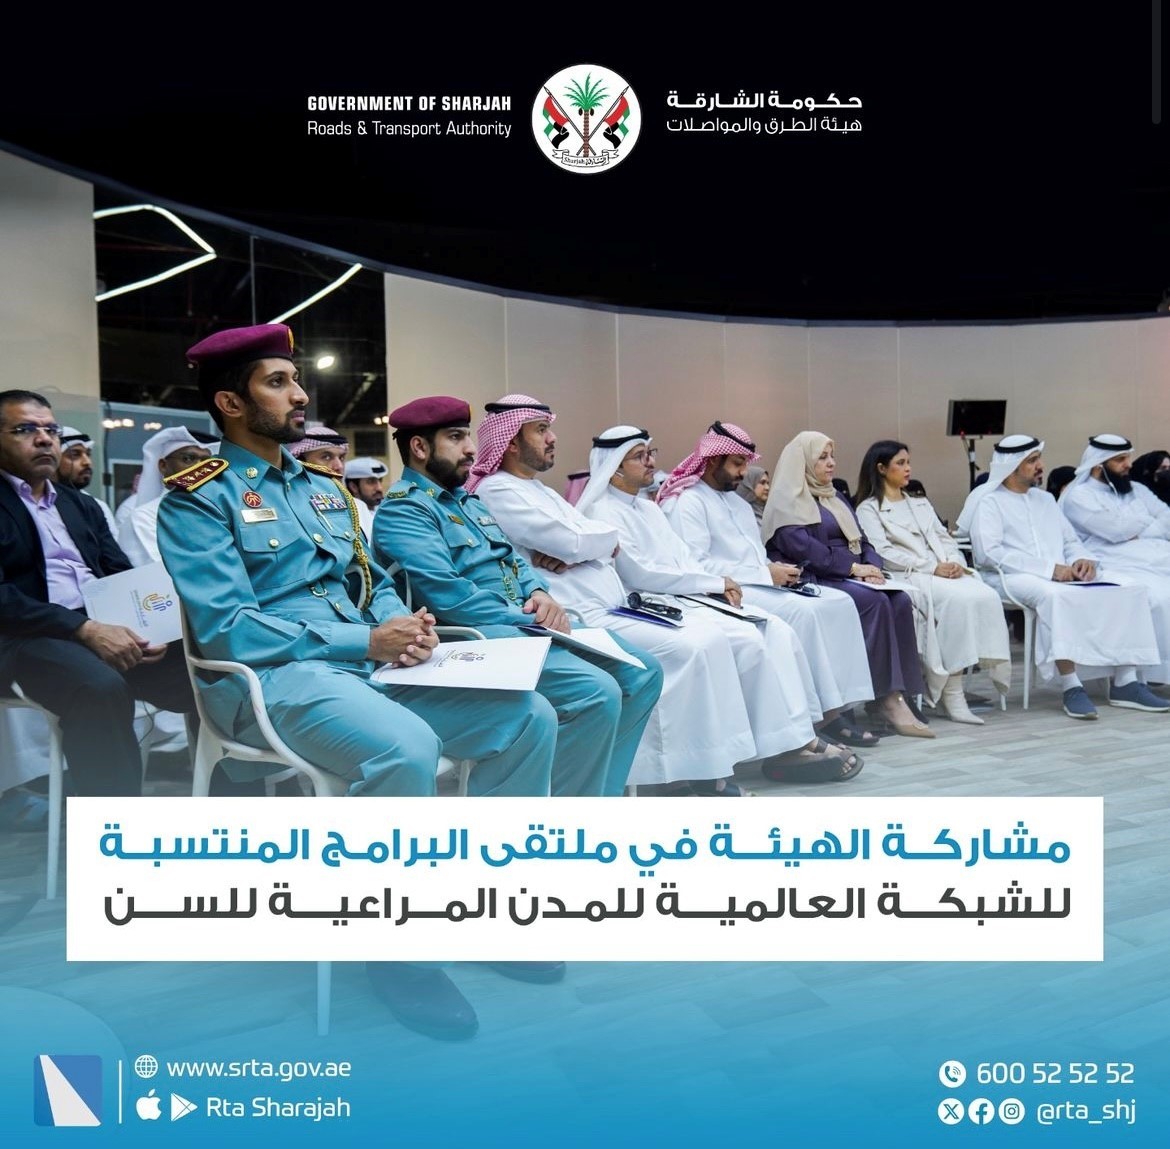 The Authority’s participation in the forum of programs affiliated with the Global Network of Age-Friendly Cities